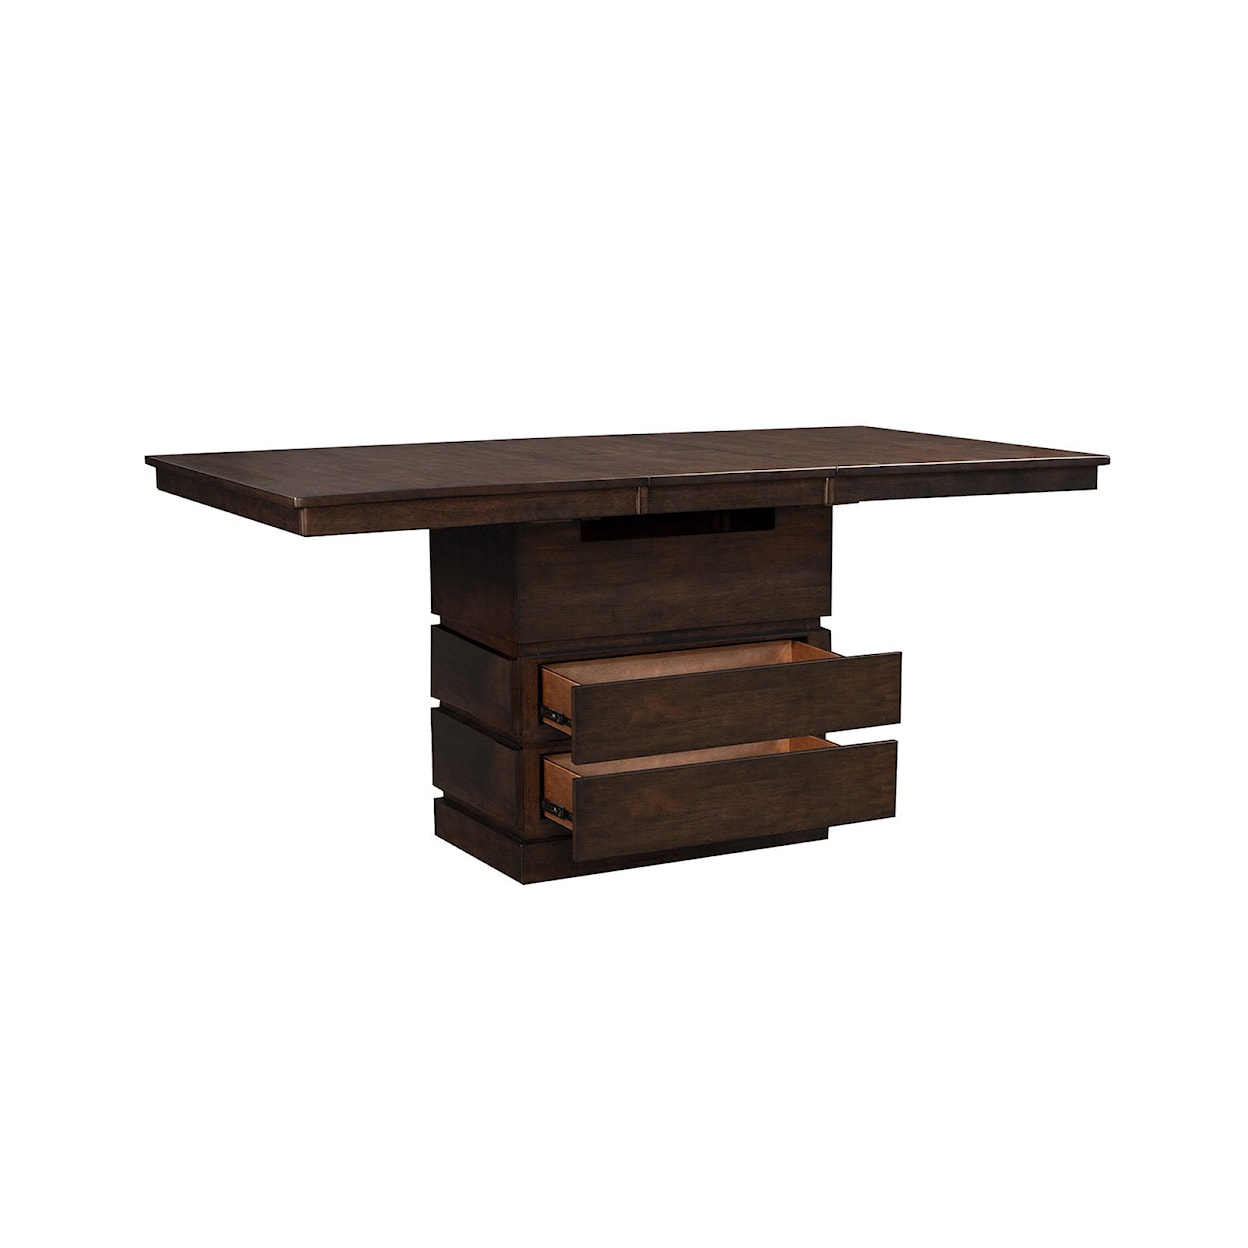 AAmerica Chesney Adjustable Dining Table